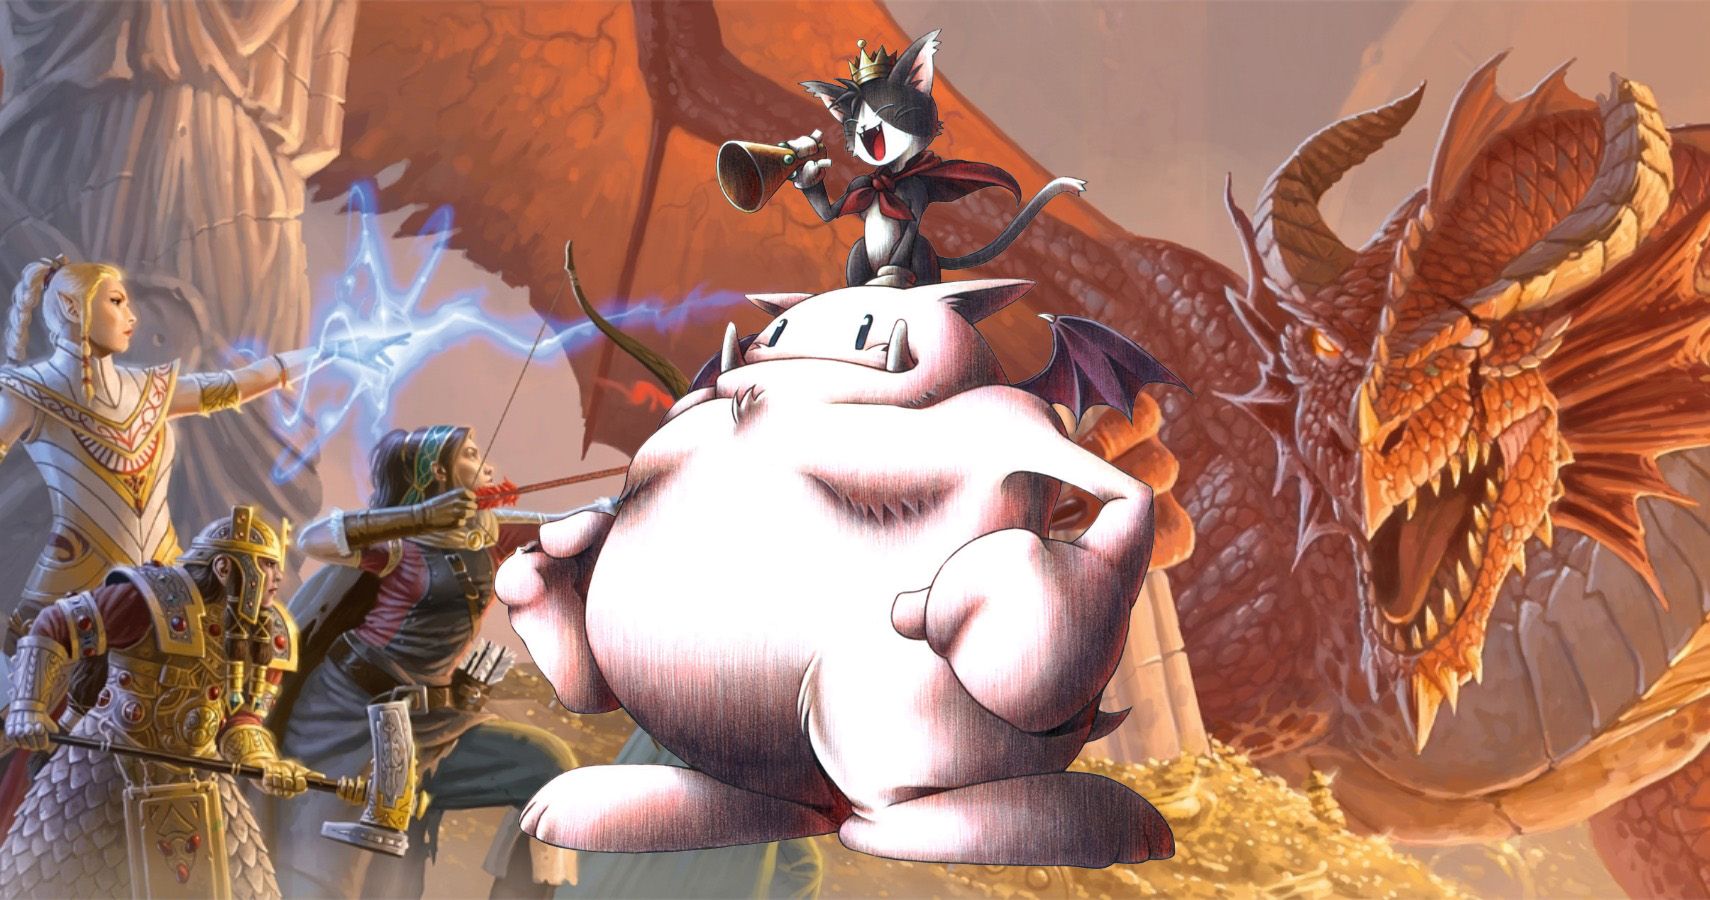 How To Build Cait Sith From Final Fantasy VII In Dungeons & Dragons